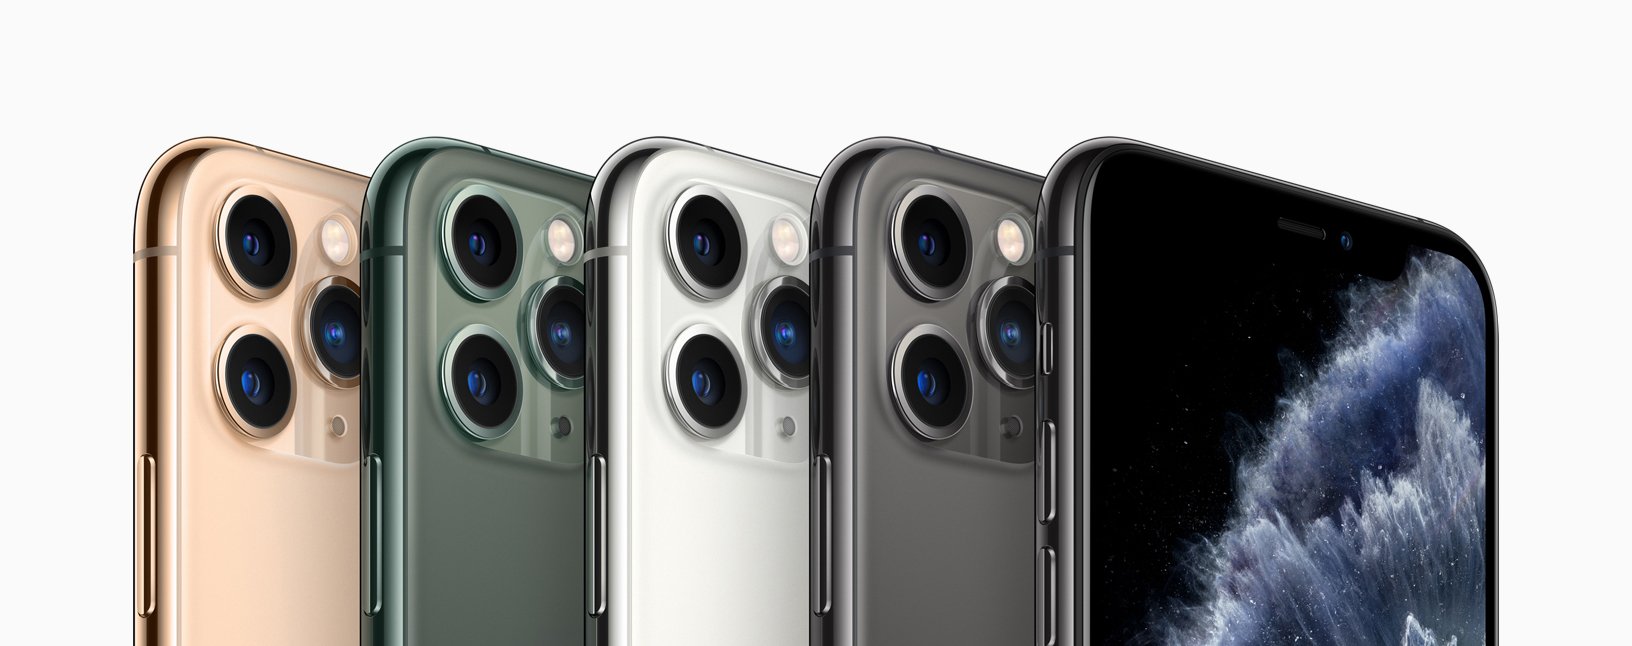 iPhone 12 Pro Max Preview: The Camera Hardware Changes